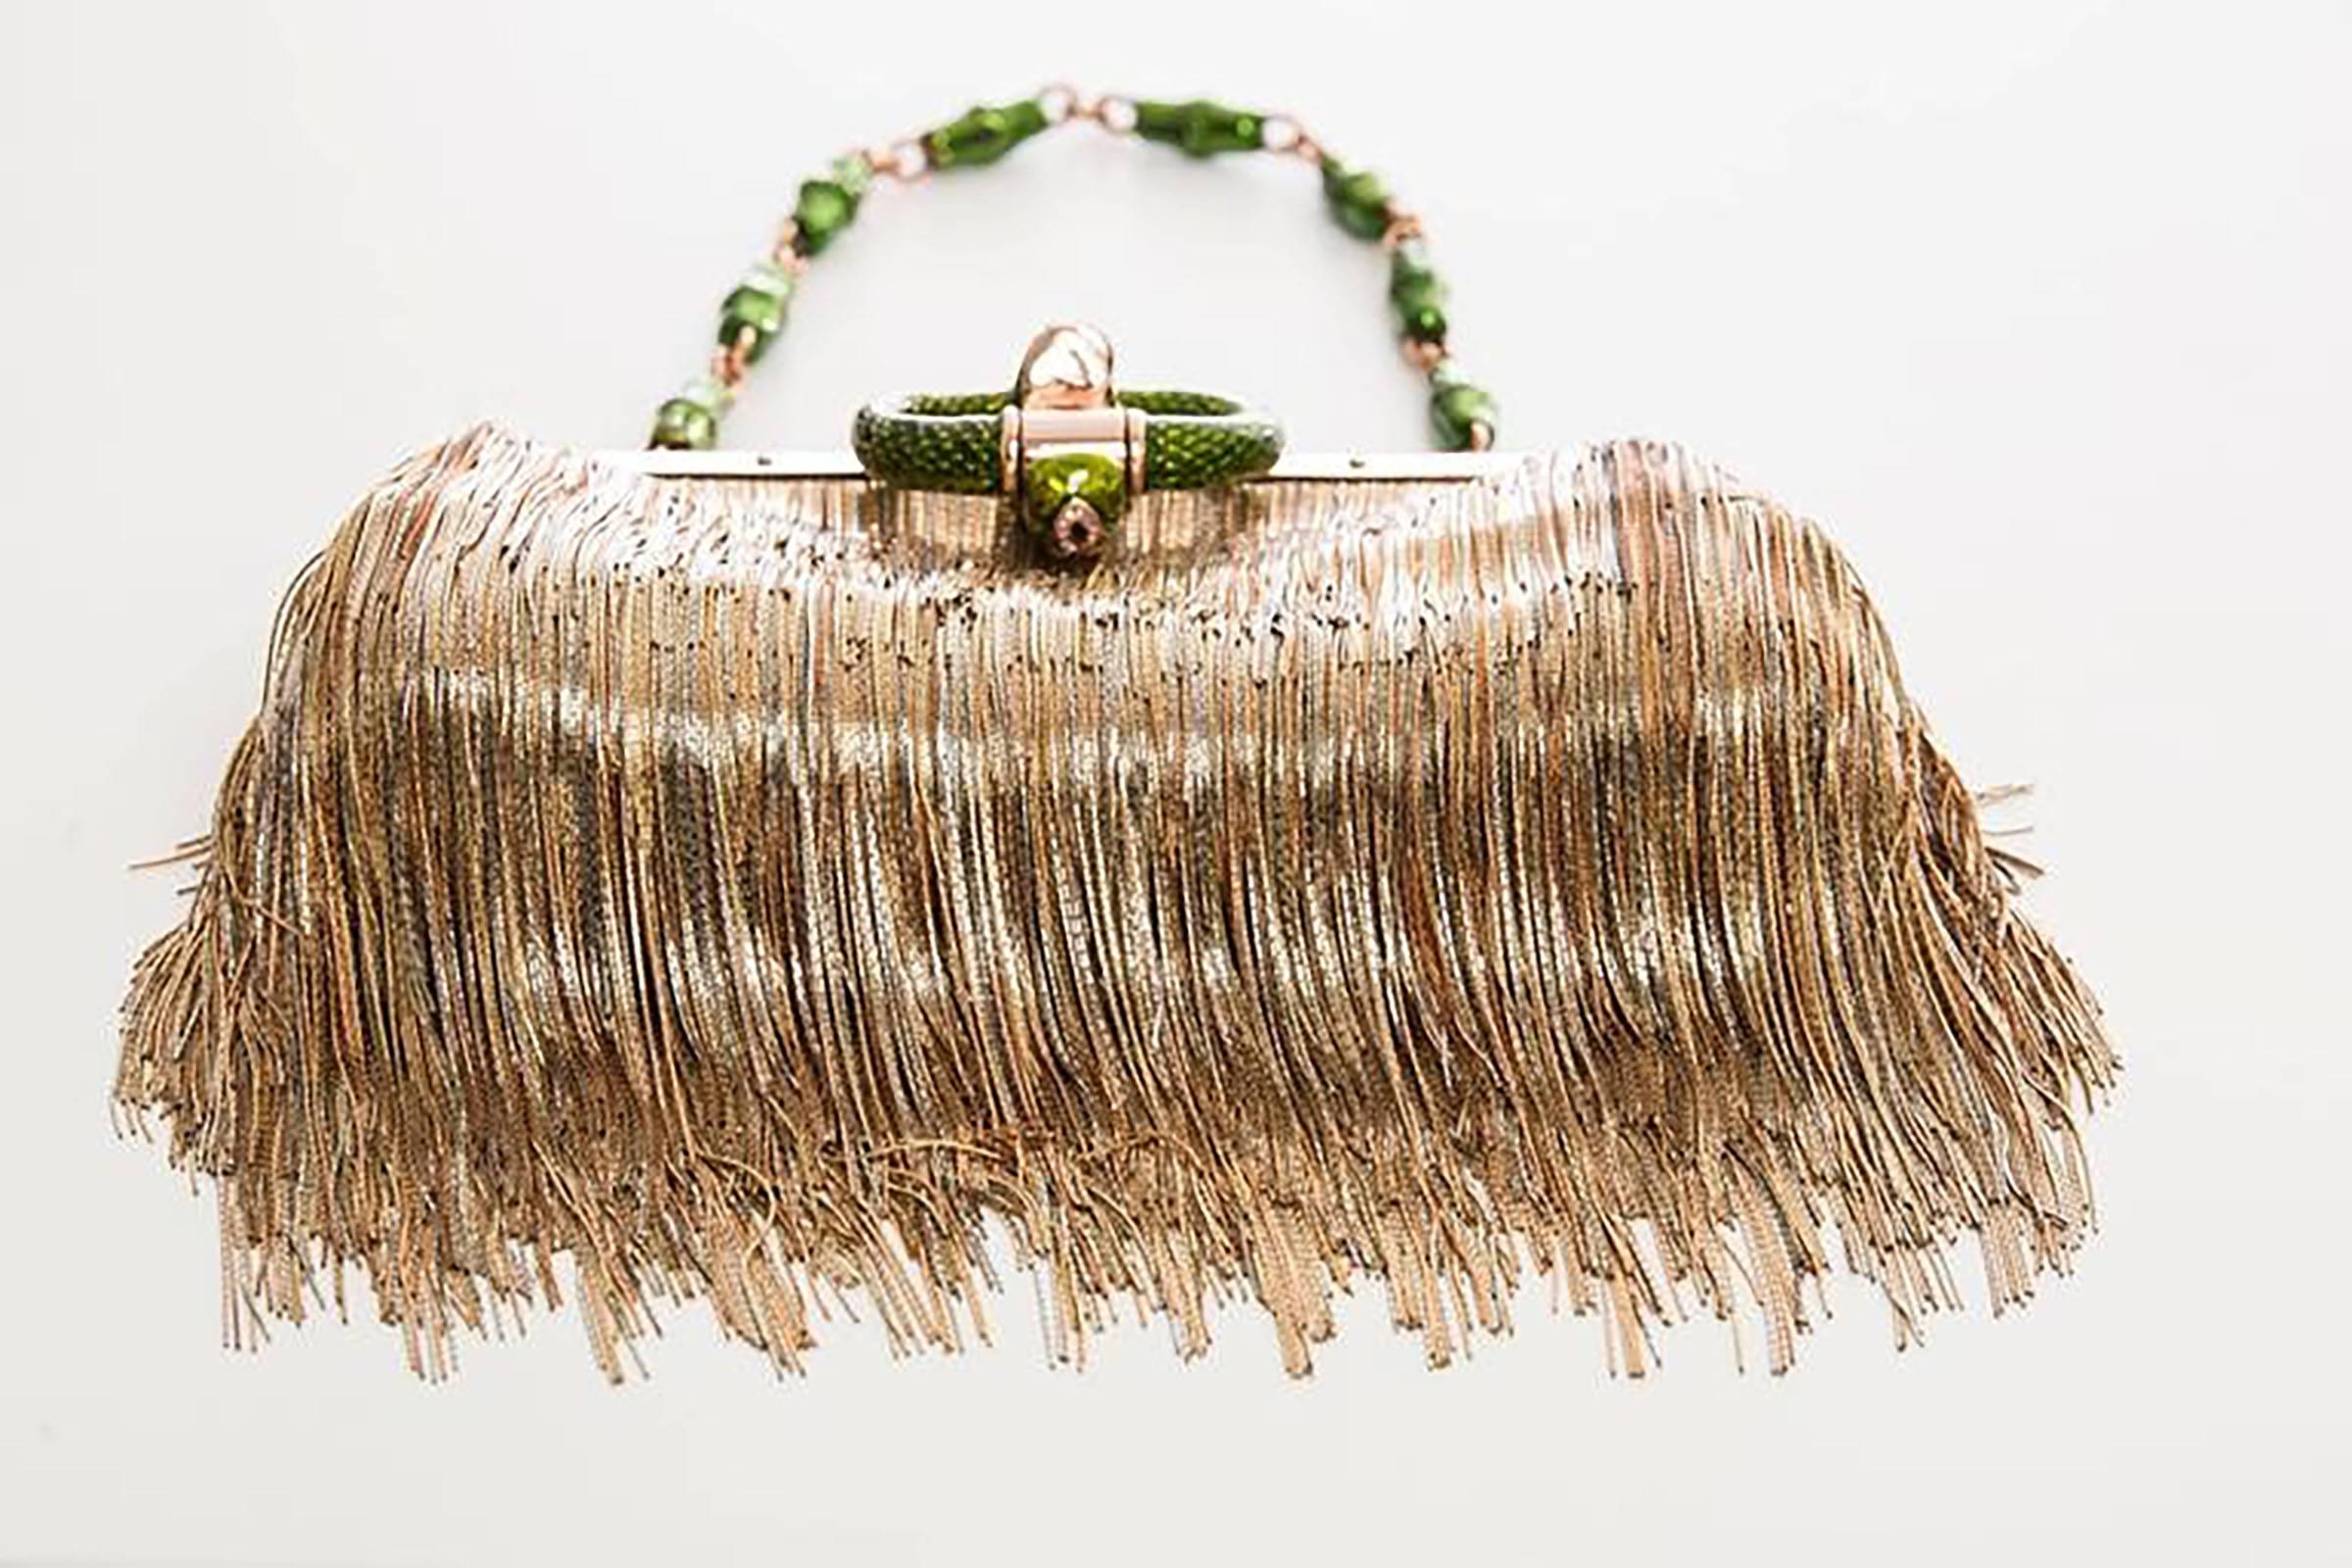 Tom Ford for Gucci Limited Edition Fringe Dragon Clutch 1